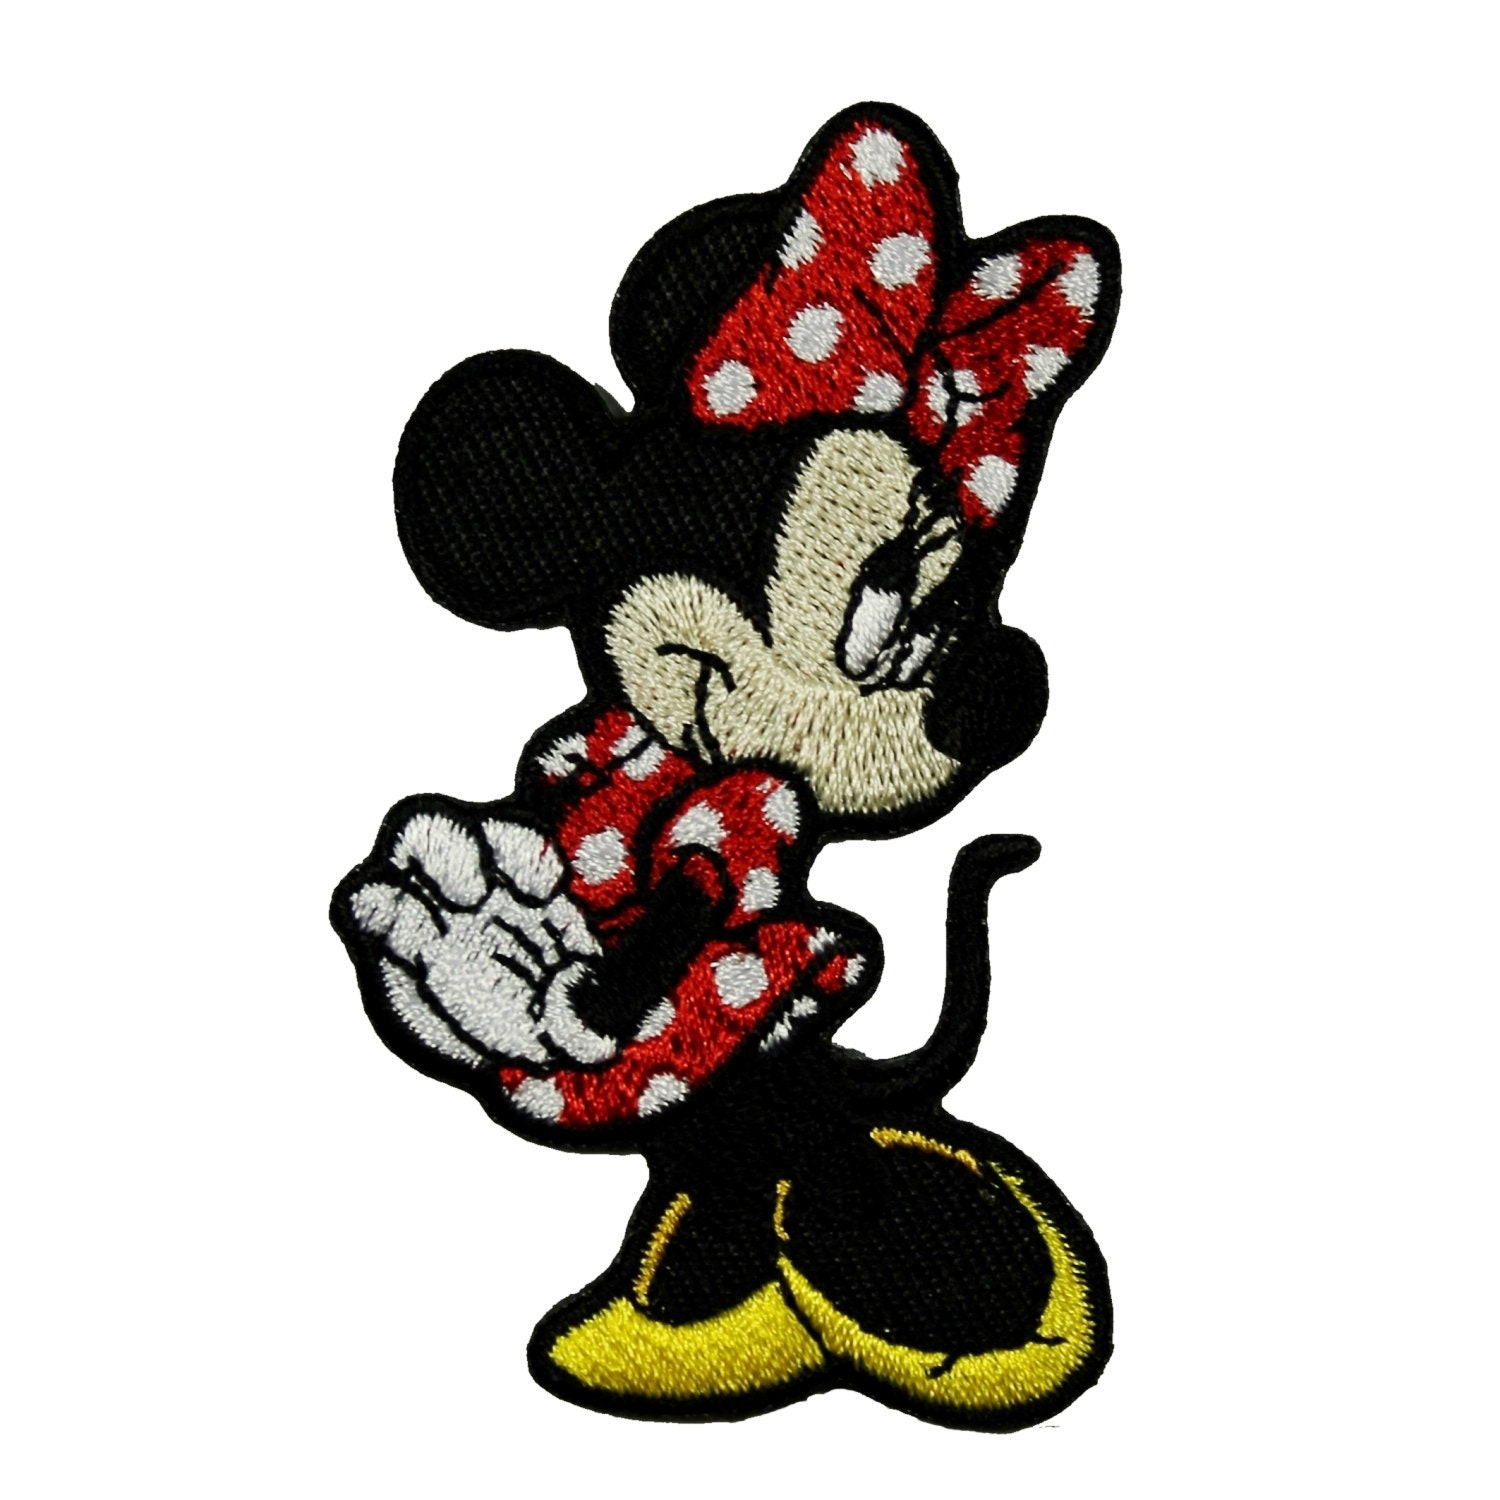  Minnie Mouse Heart Shades Iron On Applique Fan DIY Decoration  Craft Patch